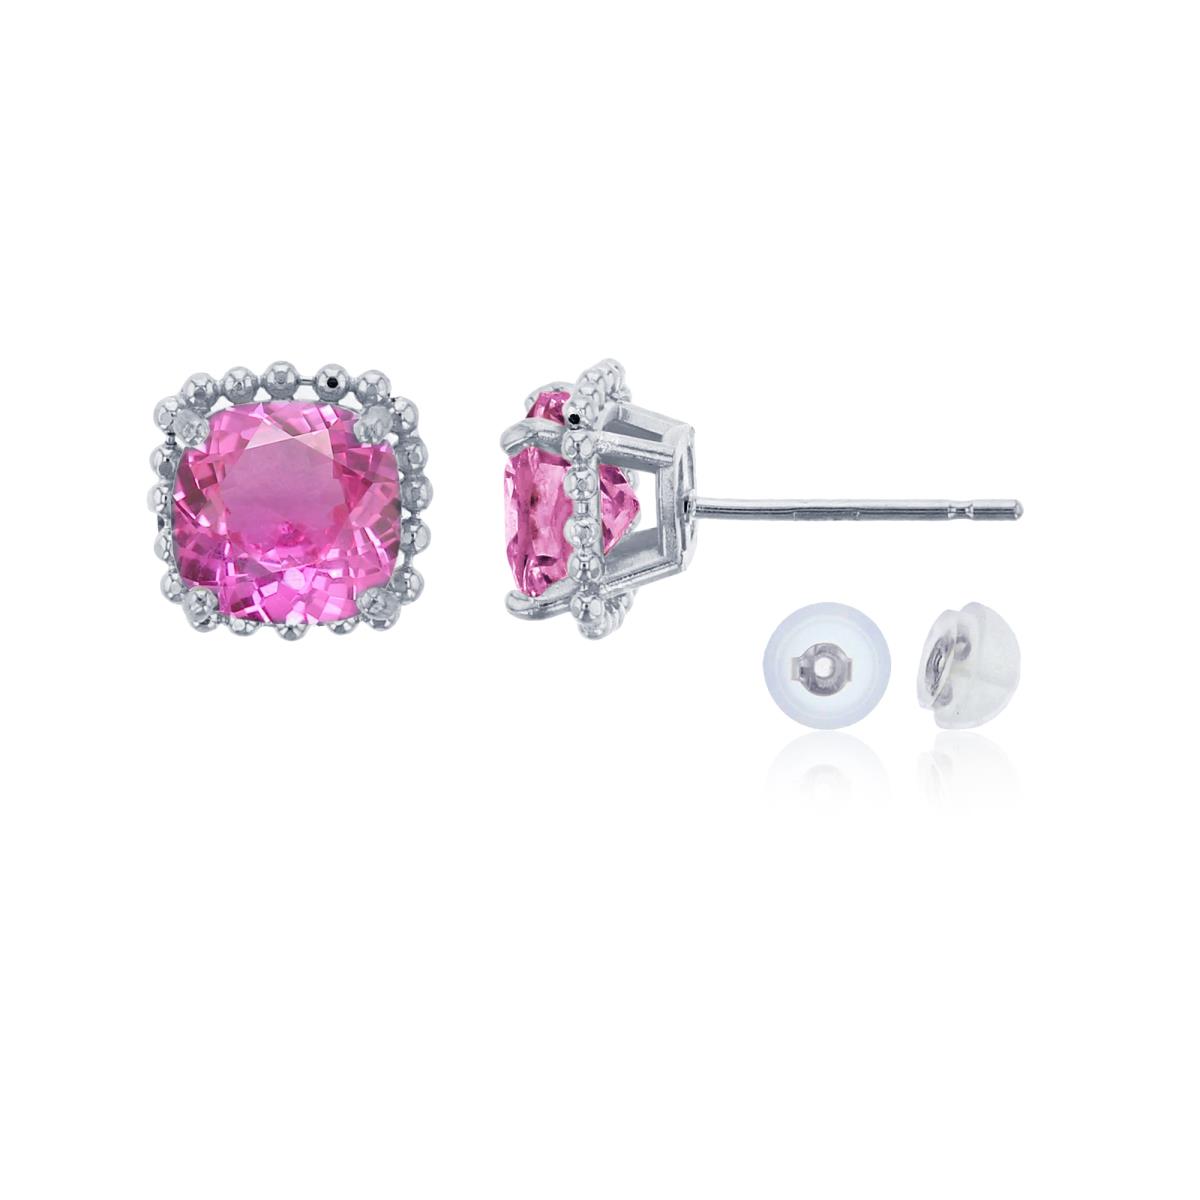 10K White Gold 6x6mm Cushion Cut Created Pink Sapphire Bead Frame Stud Earring with Silicone Back